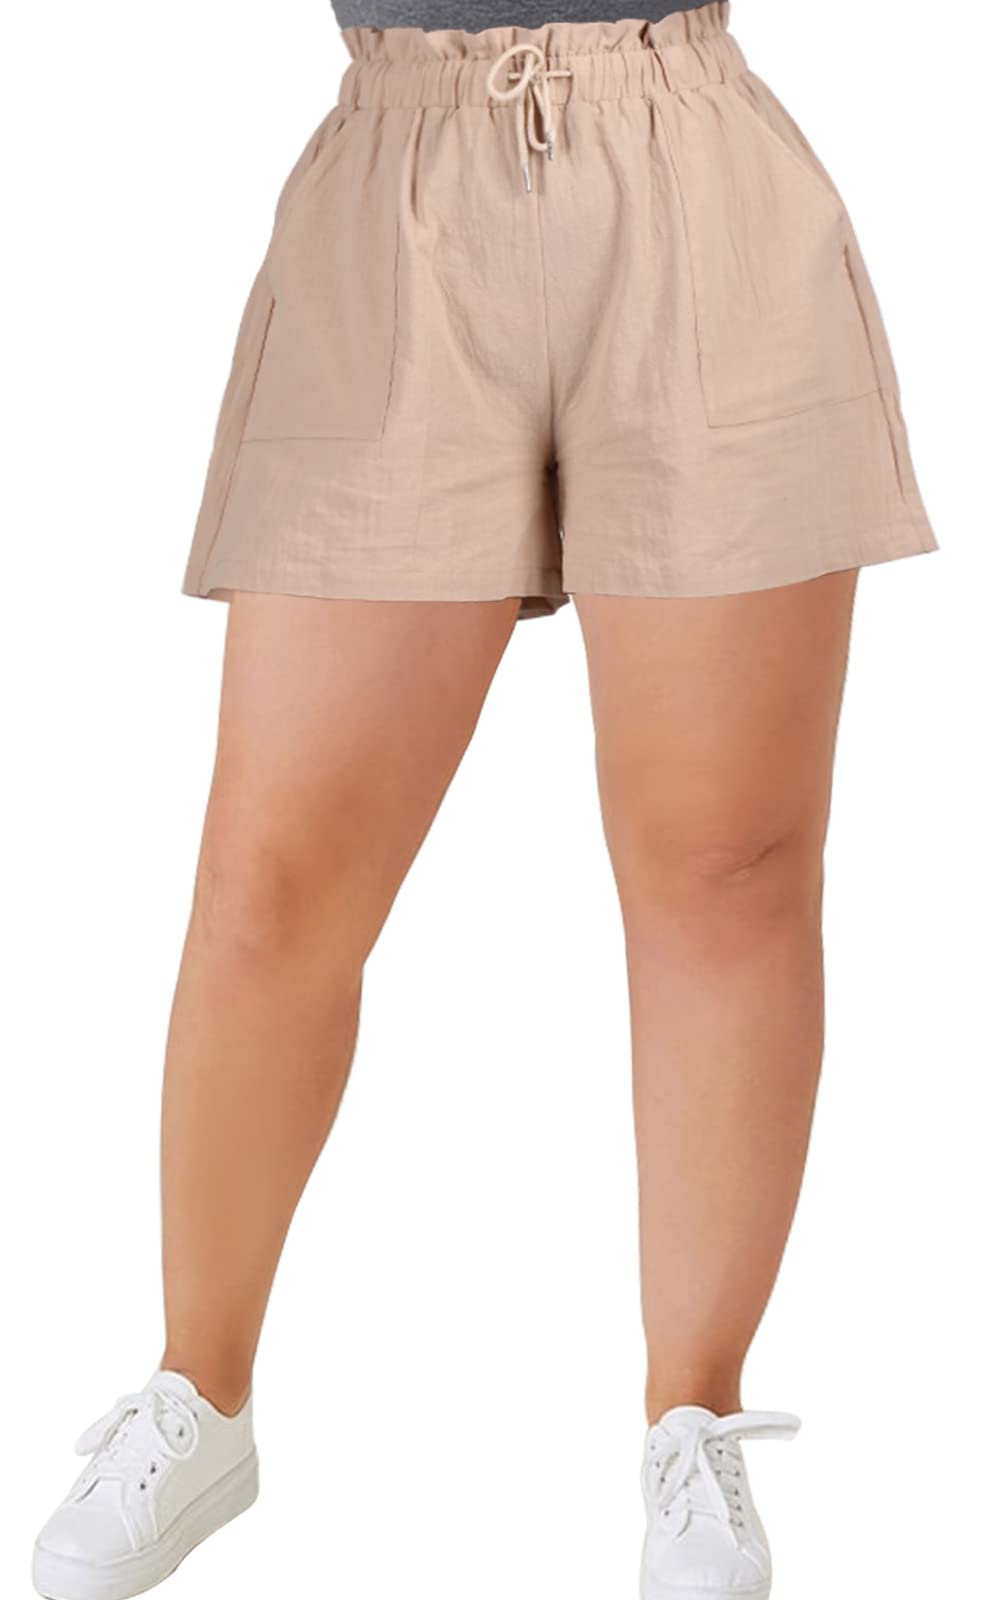 Linen High Waisted Pleated Drawstring Shorts Women's Plus Size Shorts-Beige - Moon Wood